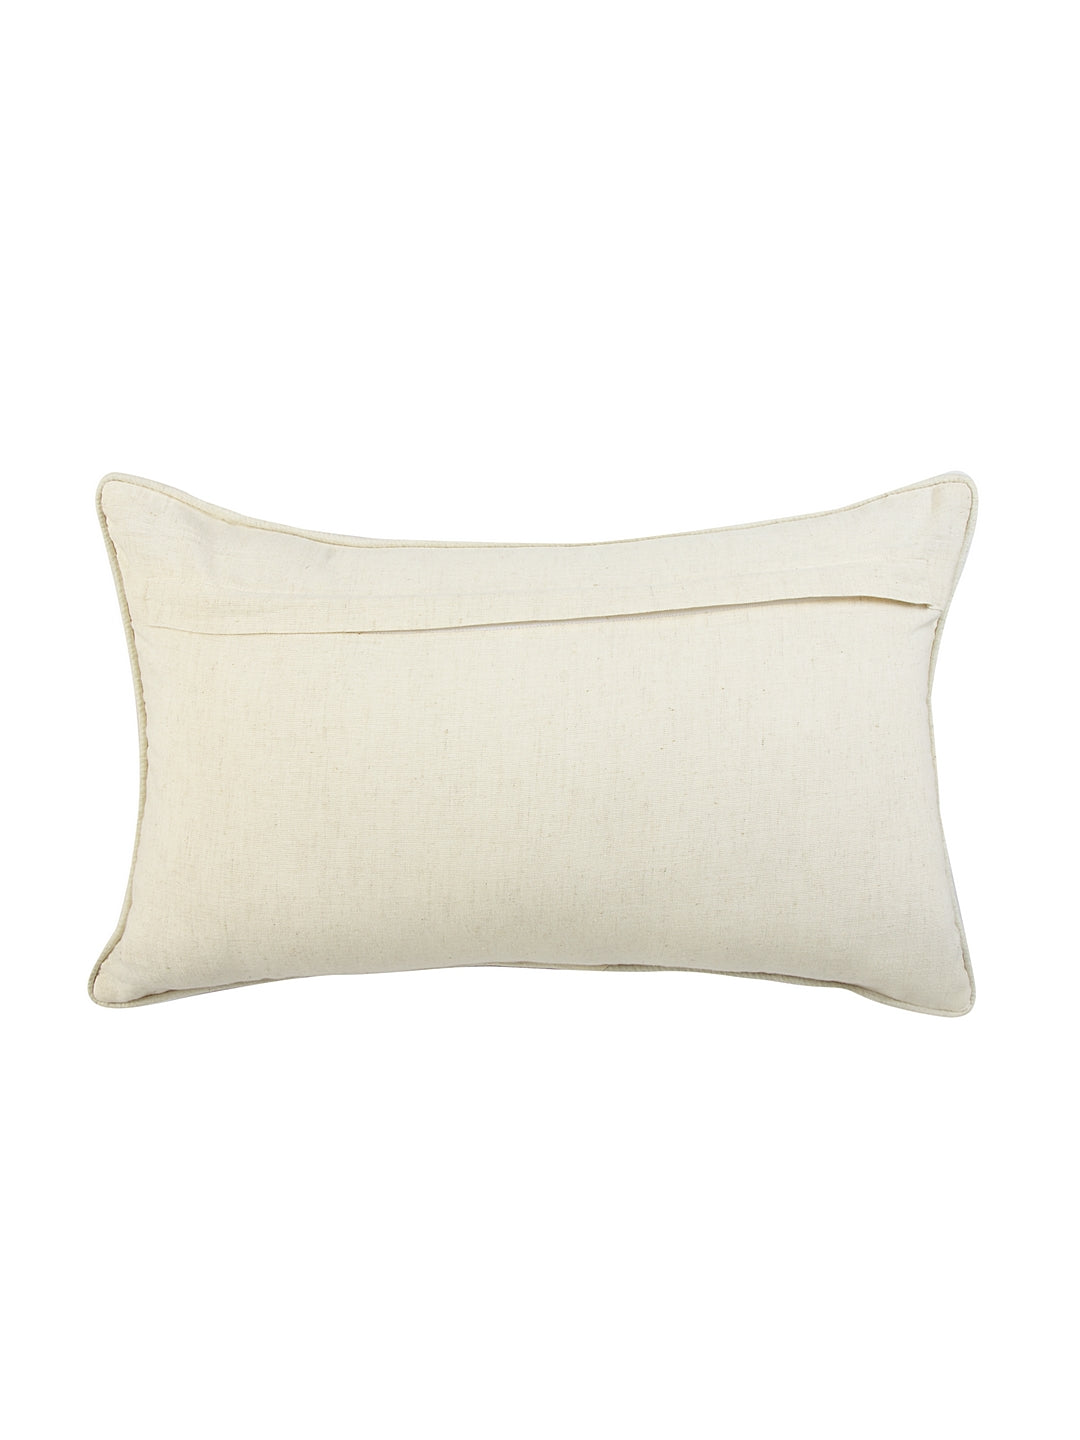 Blanc9 Arabesque Cushion Cover with Filler 30x50cm